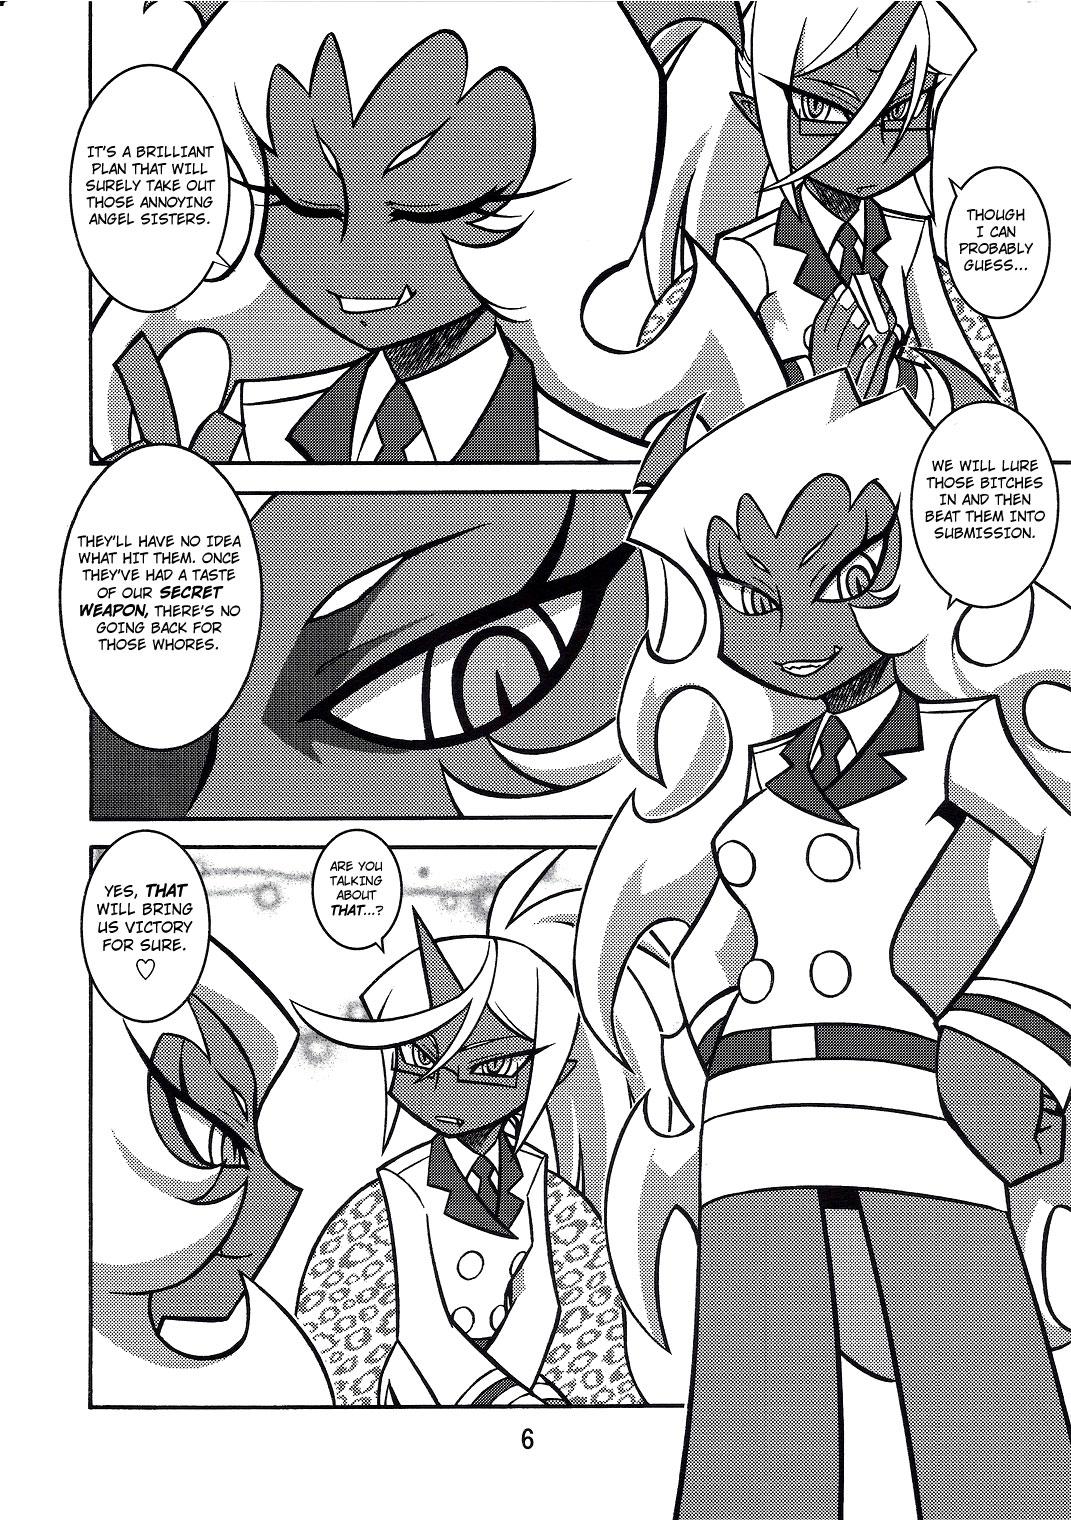 Stockings NIGHT HEAD S&K - Panty and stocking with garterbelt Barely 18 Porn - Page 5